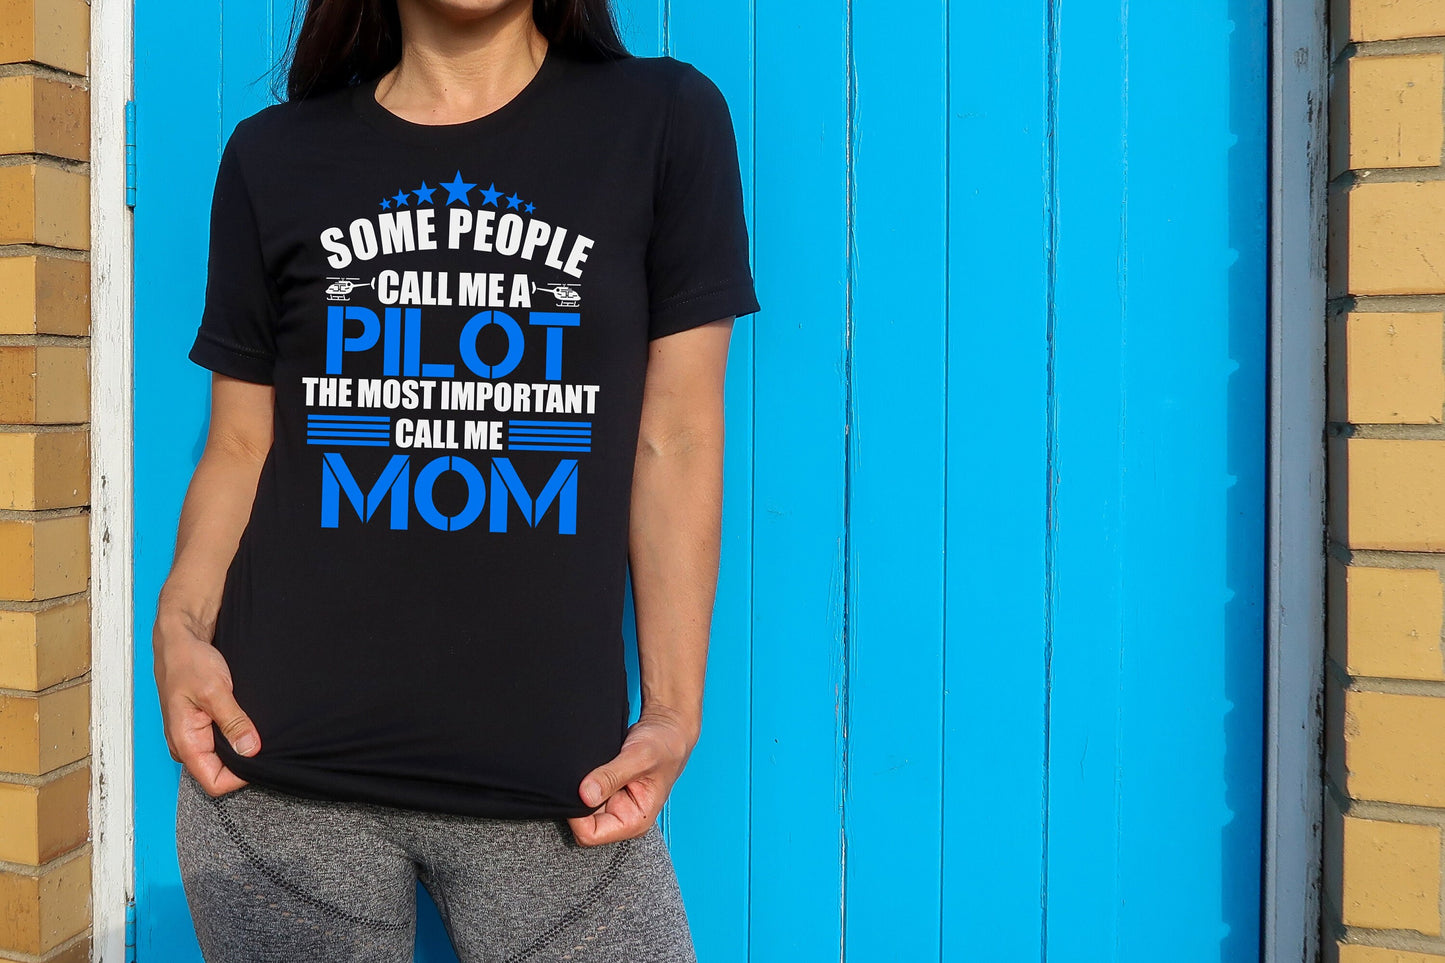 Some People Call Me a Helicopter Pilot t-shirt - Helicopter Shirt - Pilot Shirt - Pilot Gifts - Helicopter Pilot Tees - Pilot Dad -Pilot Mom